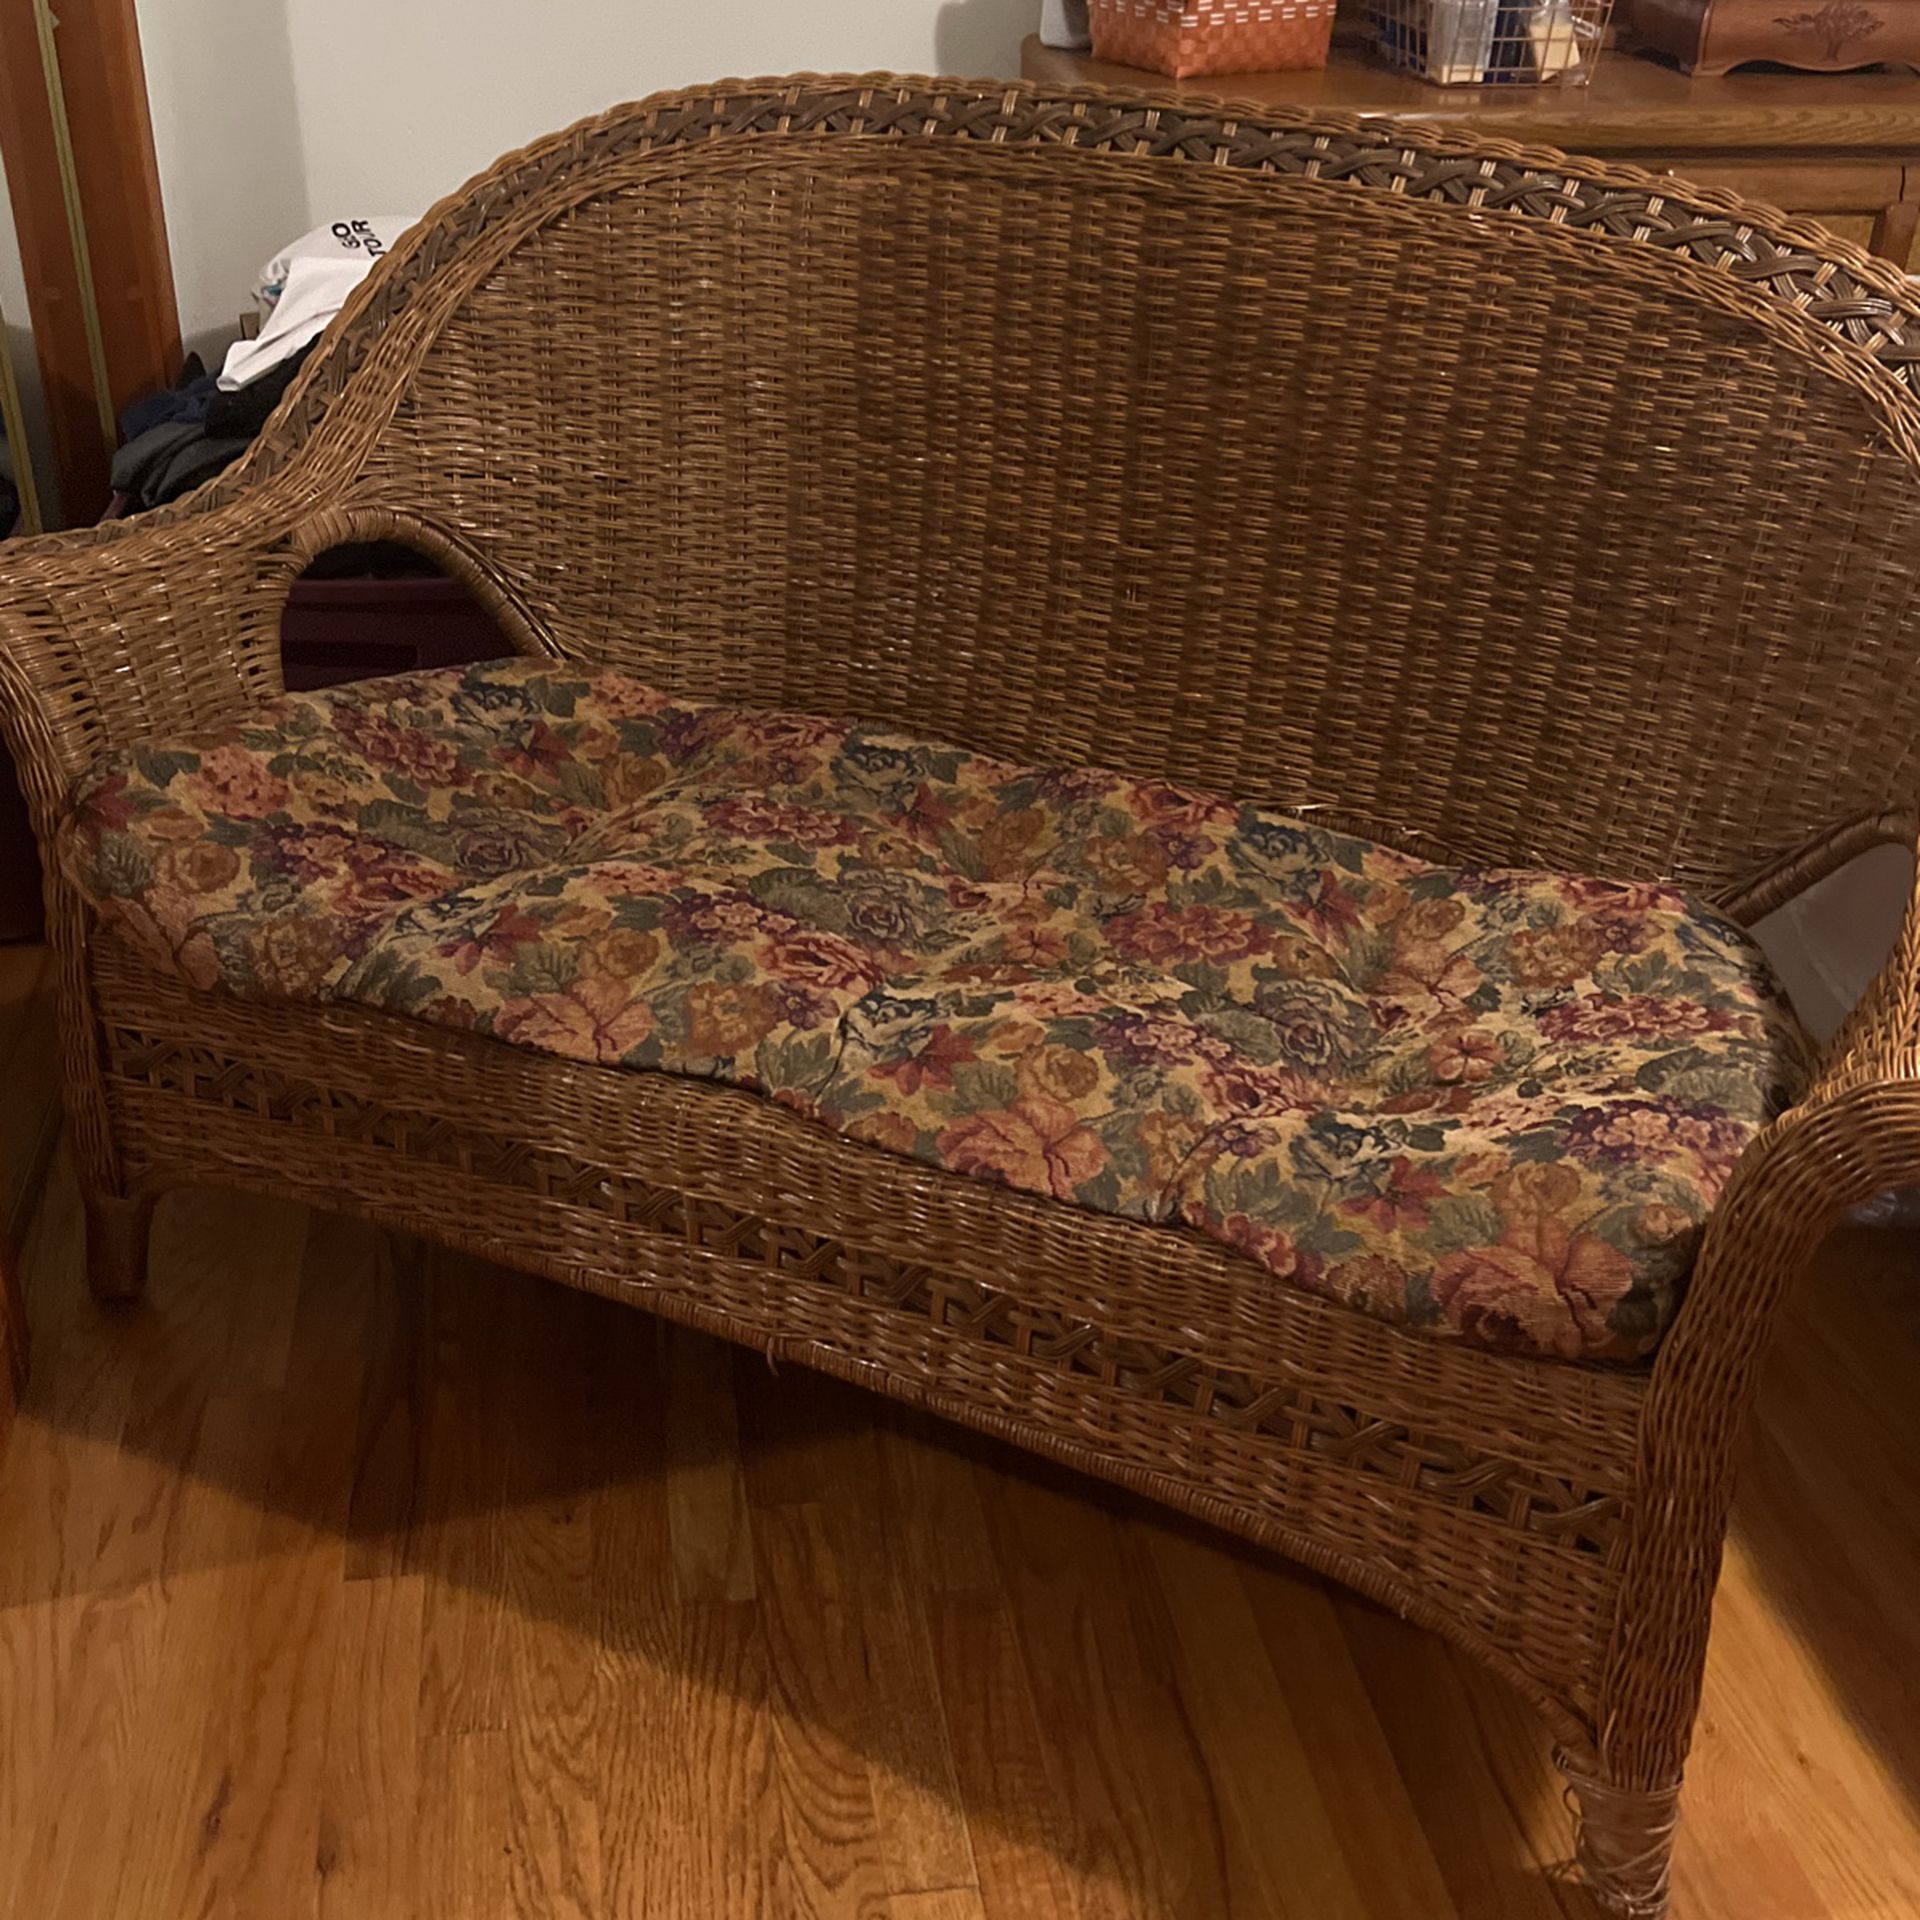 Wicker Loveseat With Full Cushion